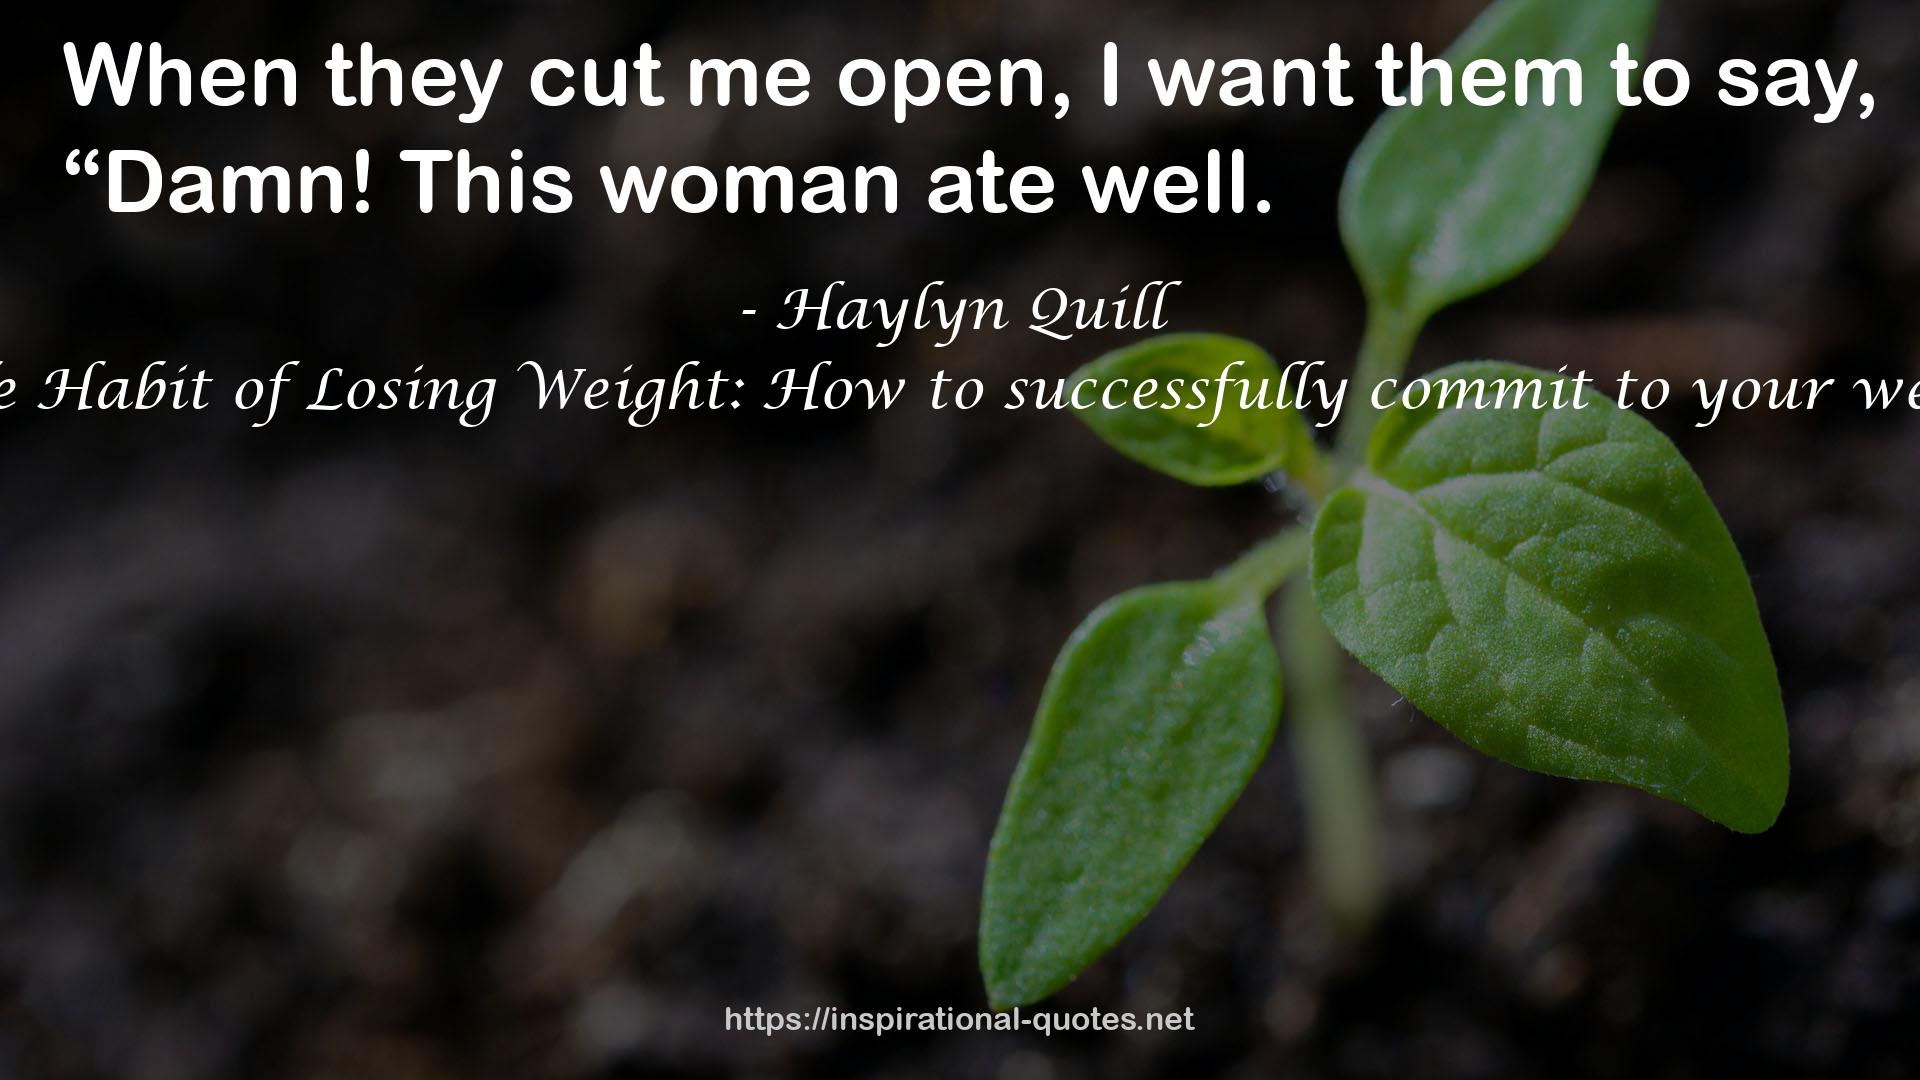 The Delectable Habit of Losing Weight: How to successfully commit to your weight loss goals QUOTES